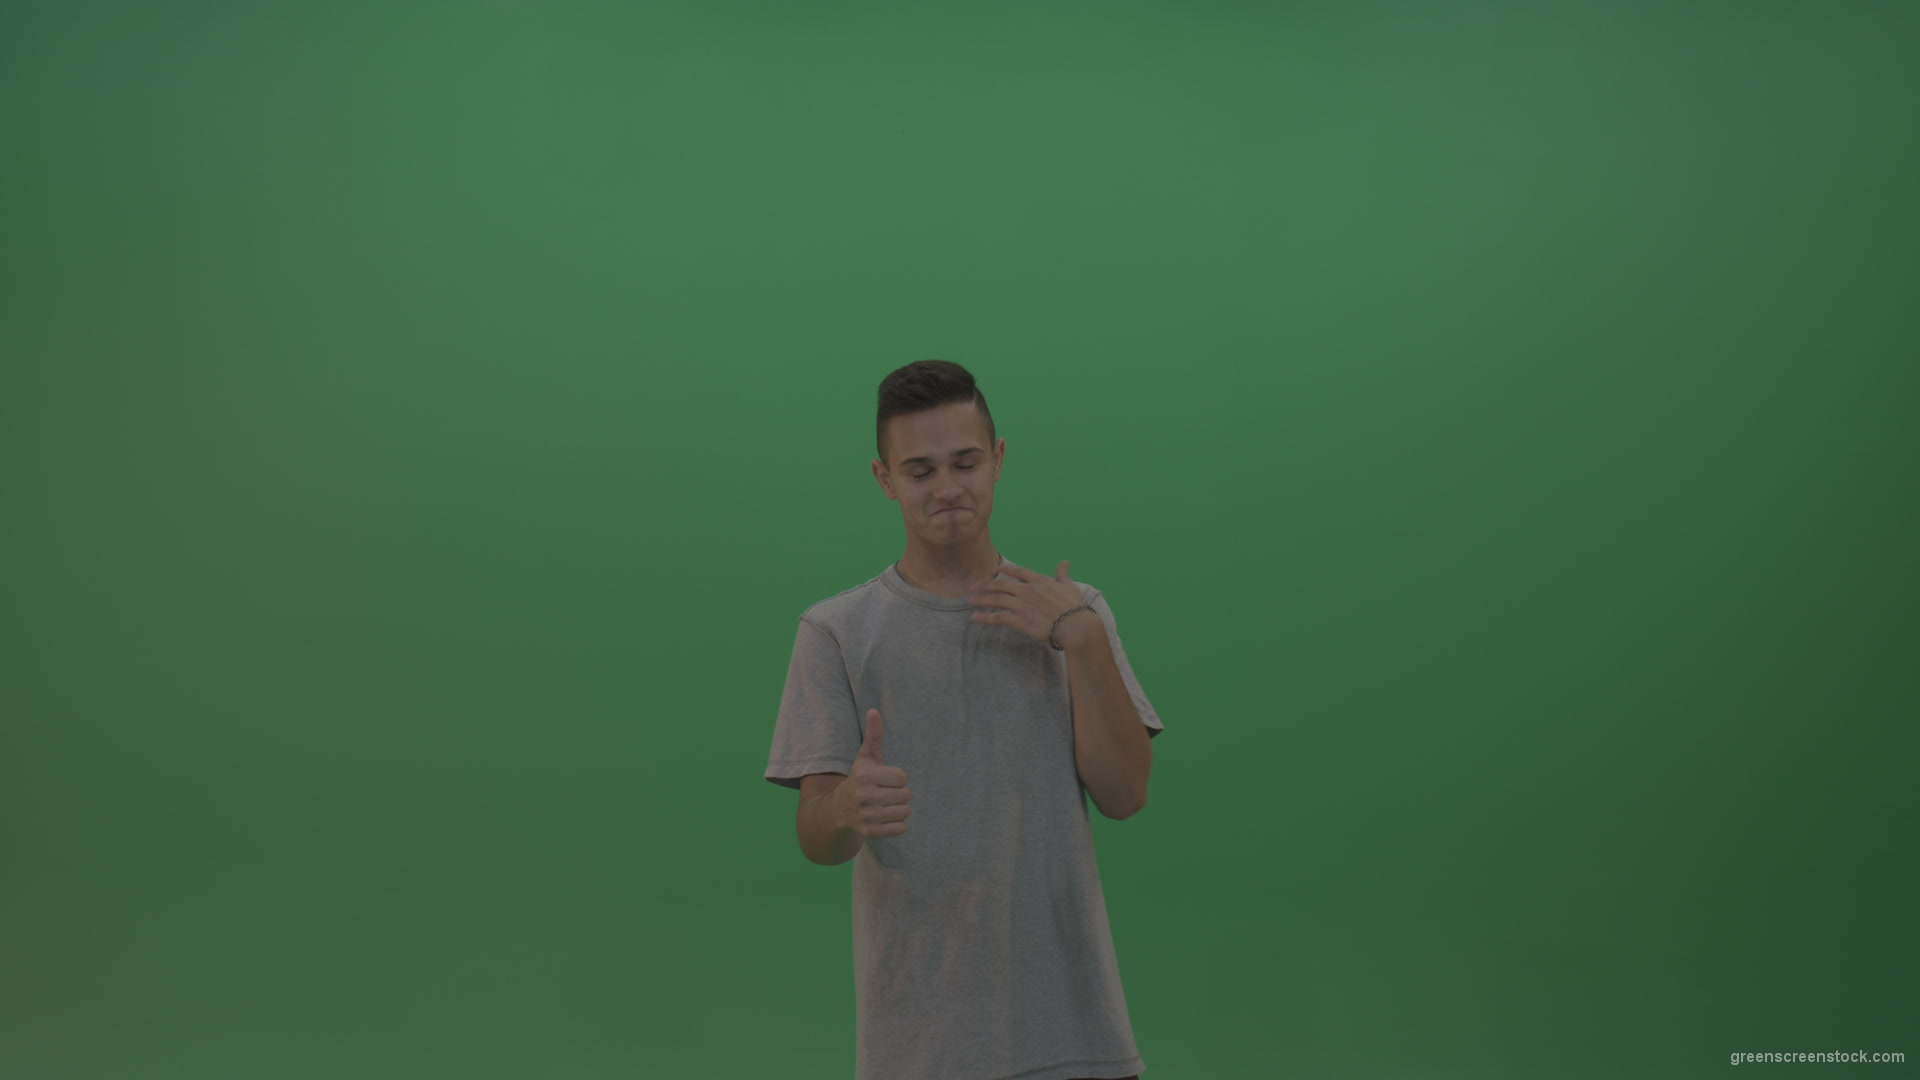 Boy-in-grey-wear-expresses-approval-by-giving-thumbs-up-over-green-screen-background_004 Green Screen Stock